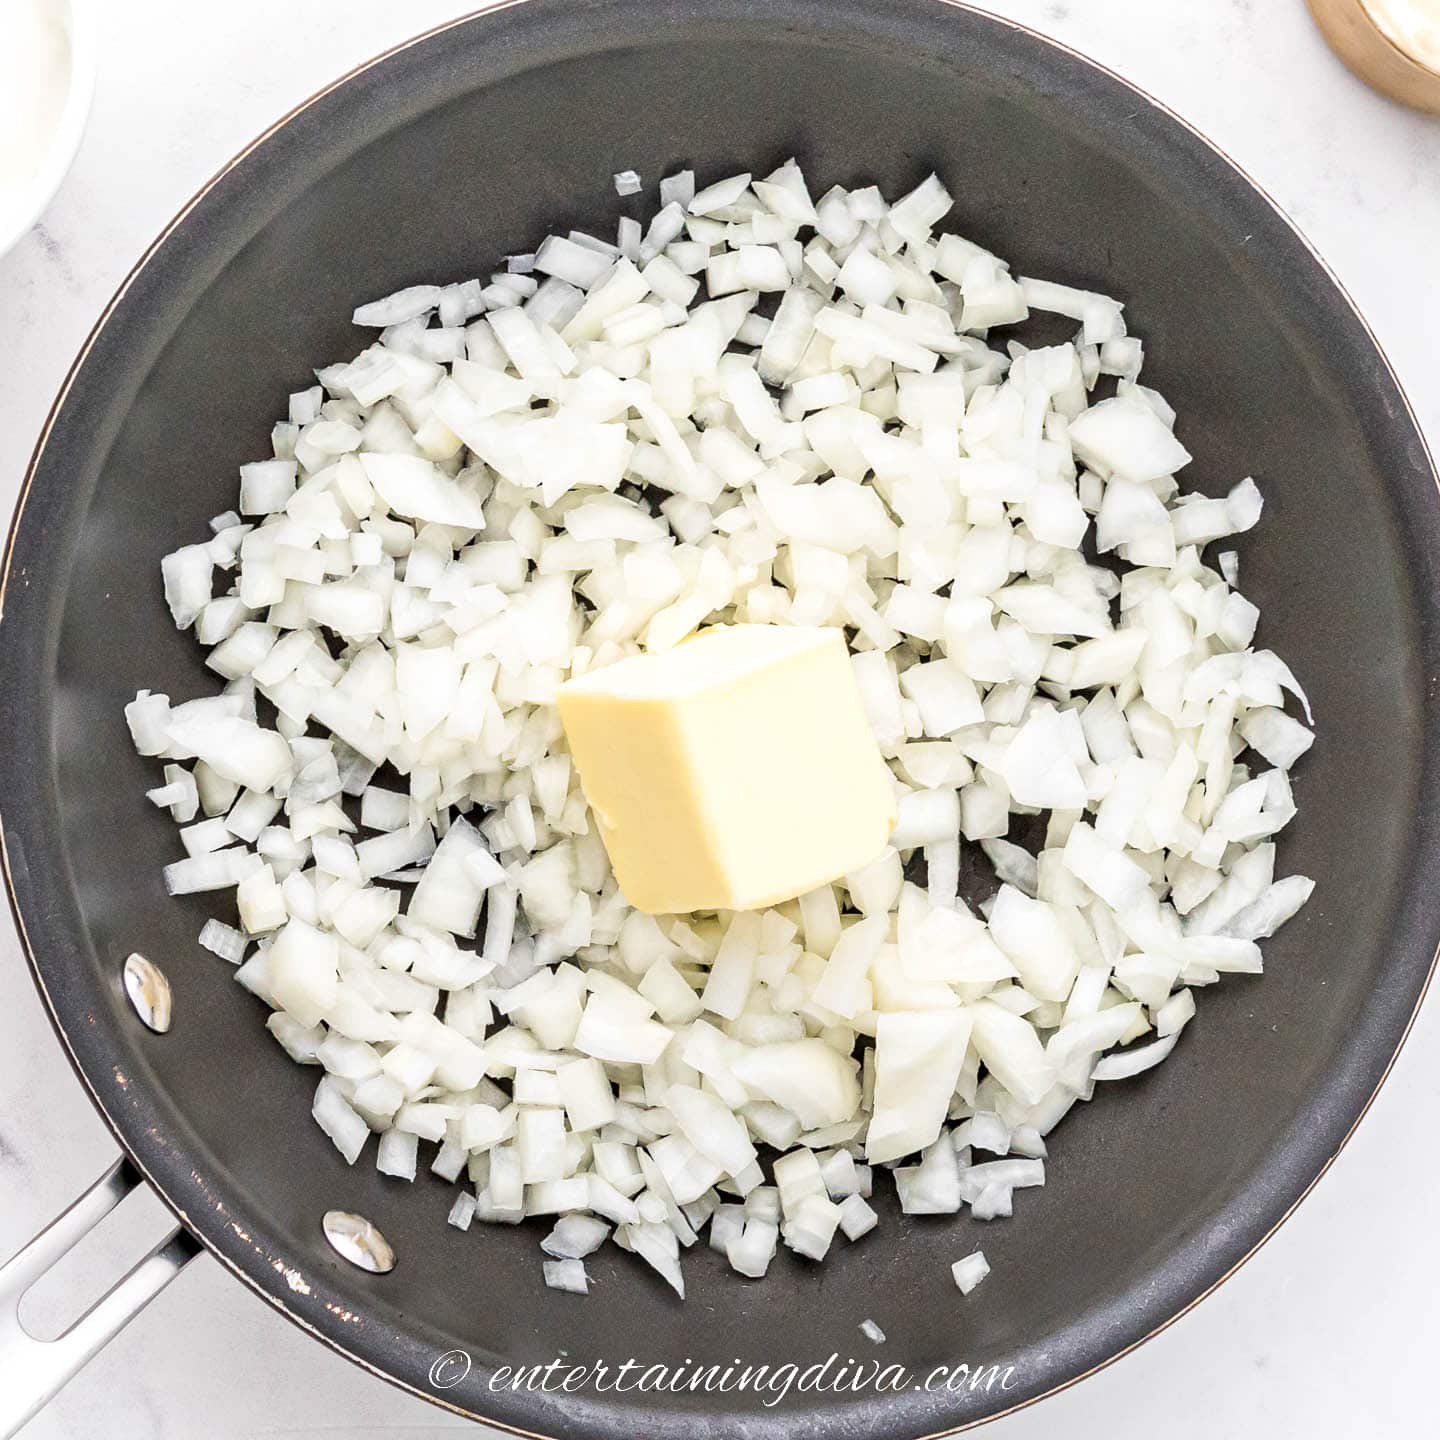 Chopped onions with butter in a frying pan